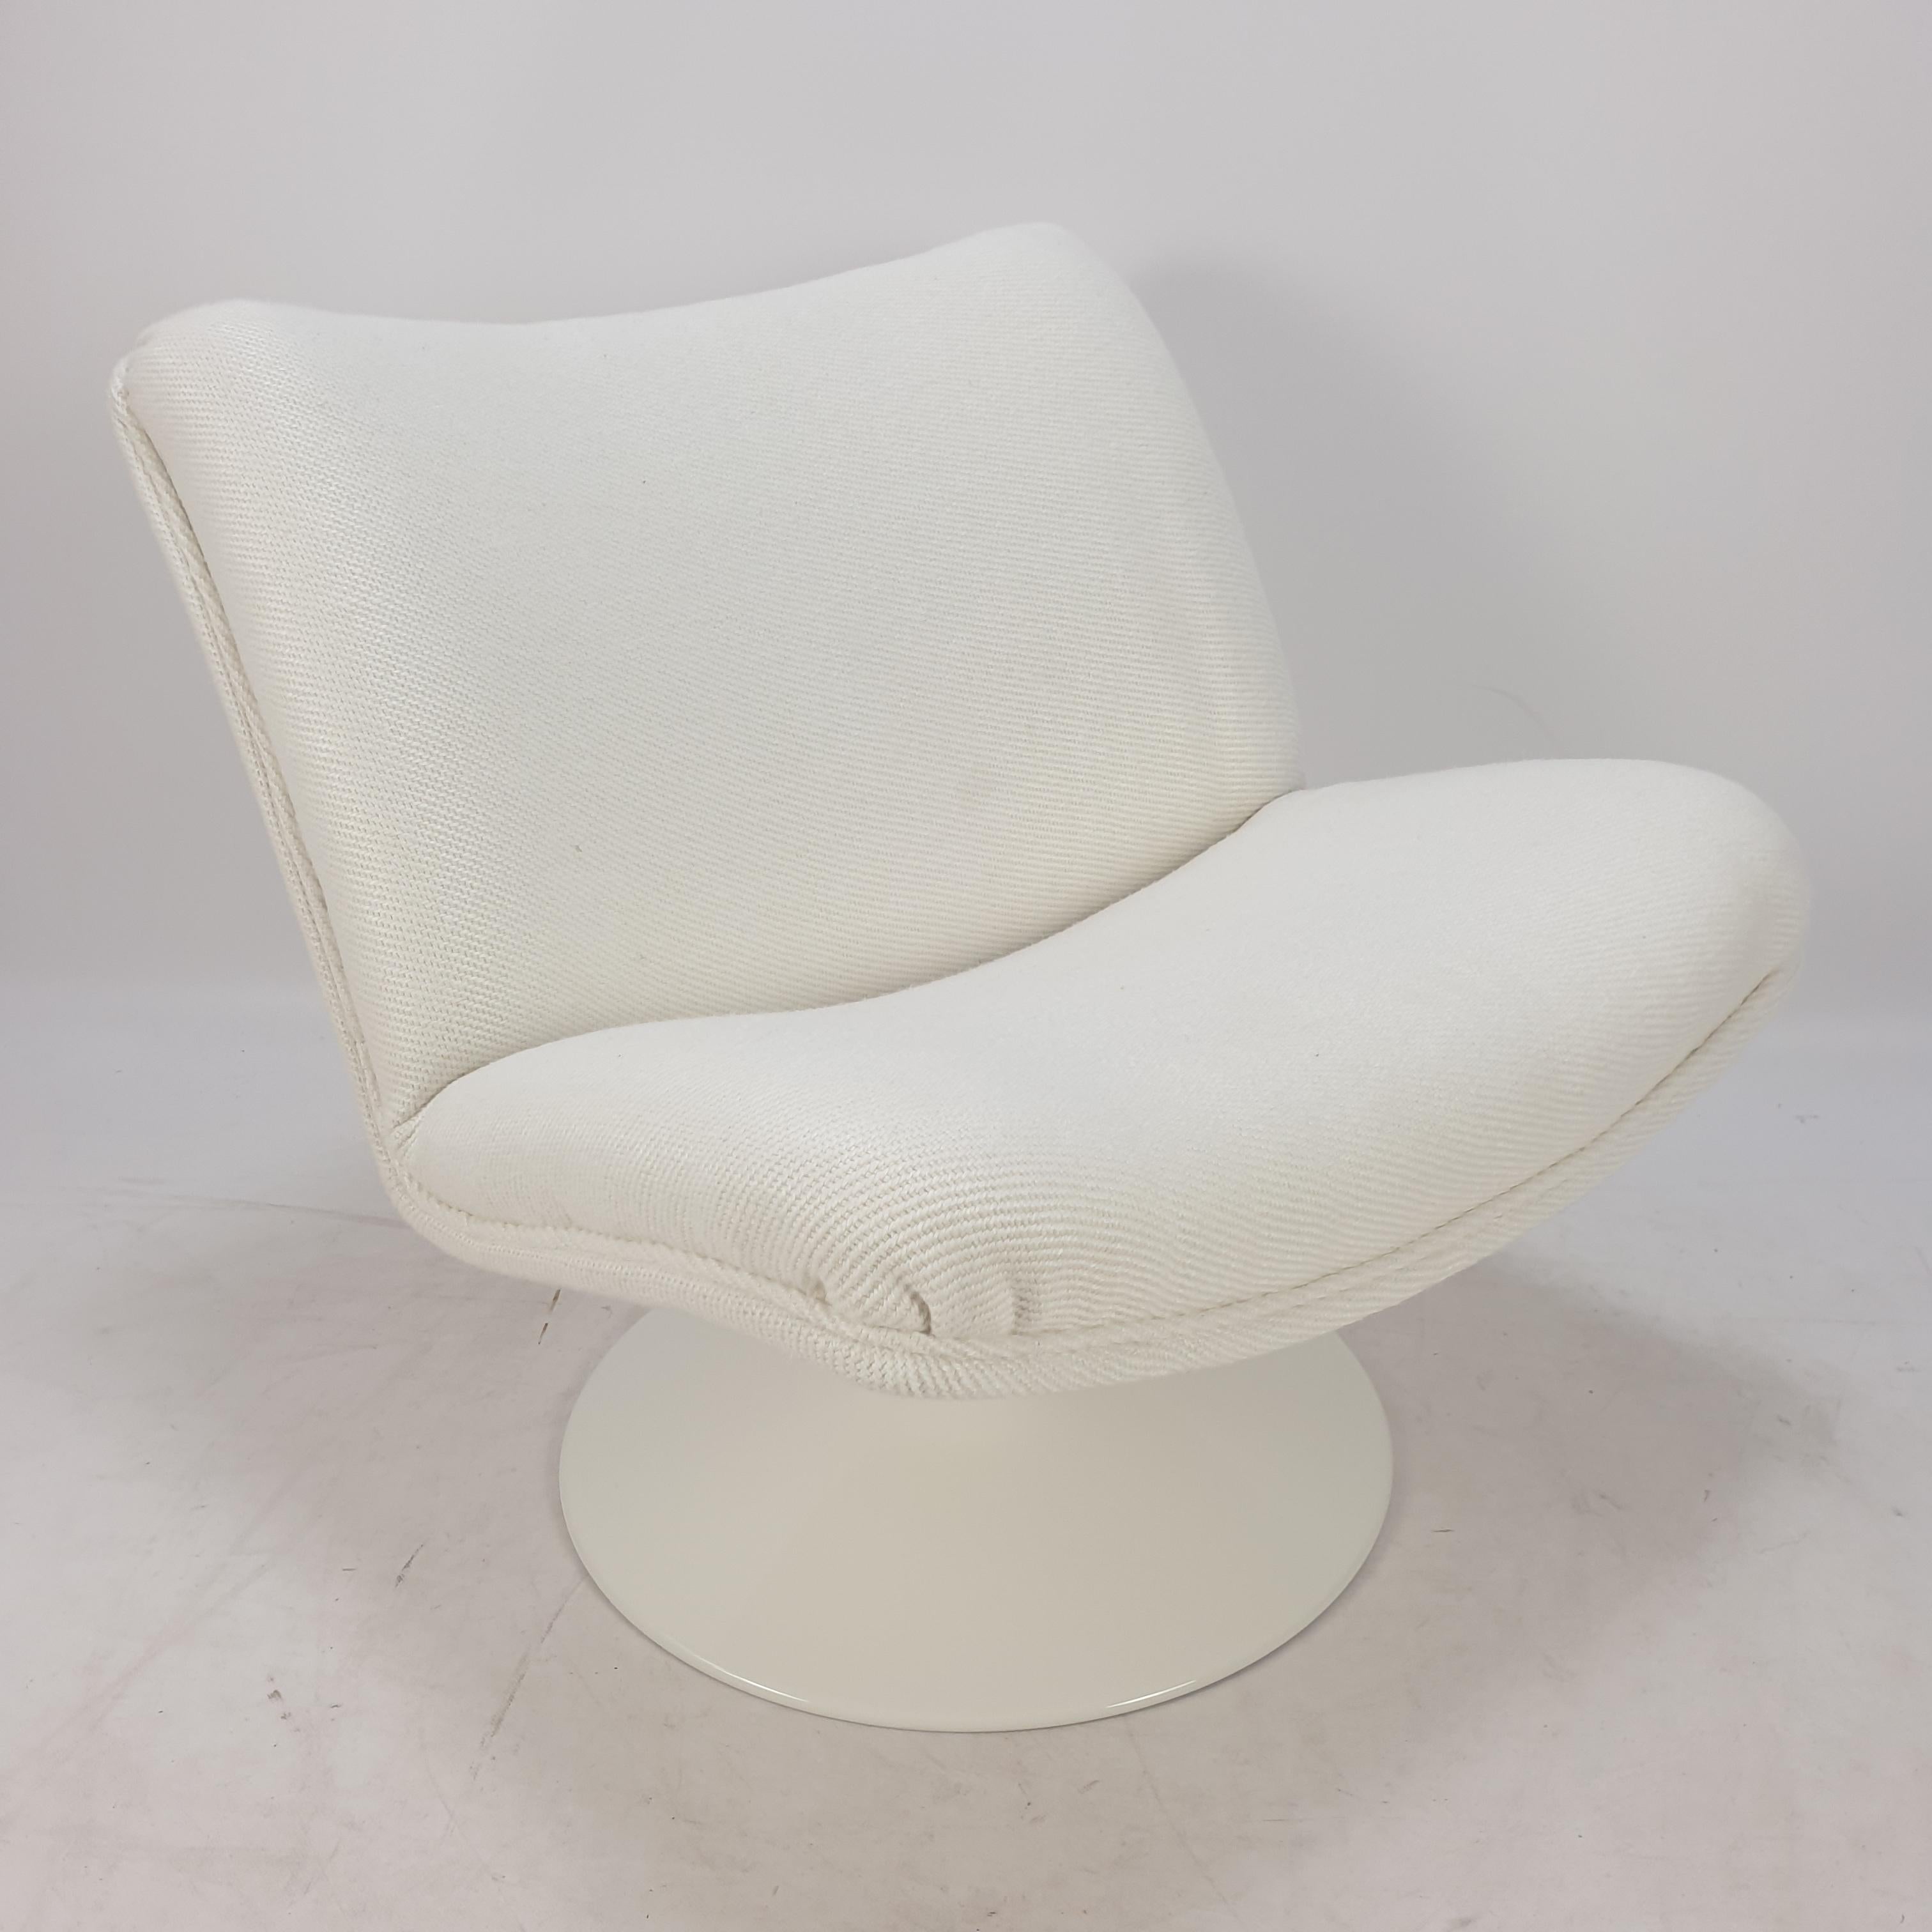 Very cute and comfortable lounge chair designed by Geoffrey Harcourt for Artifort. It has a rotating metal foot. It has just been reupholstered with lovely Pierre Frey linen fabric. The foot has just been painted bij a professional painter. The